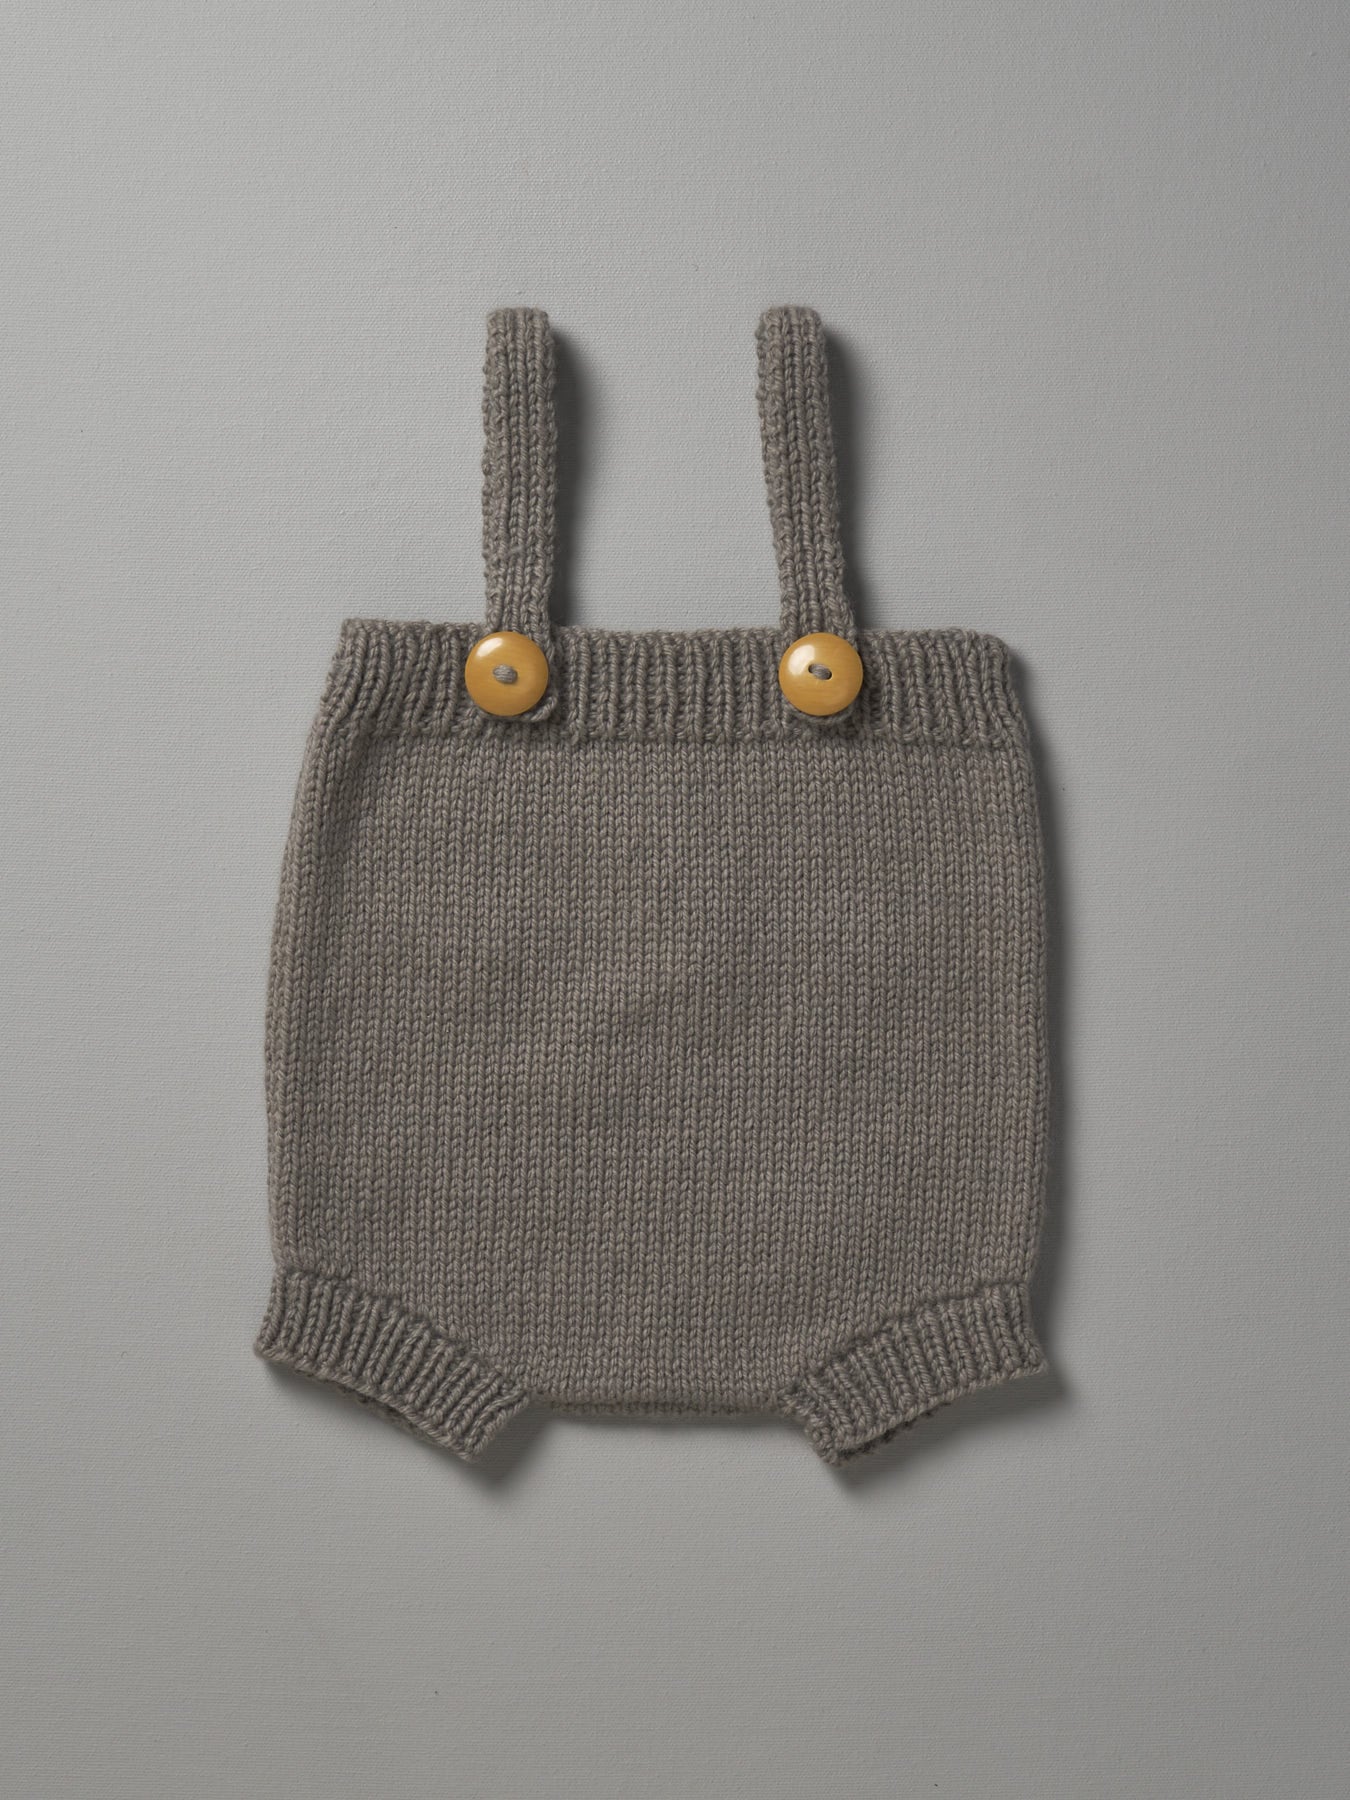 A grey Hand Knitted Romper - Mushroom with gold buttons by Weebits.